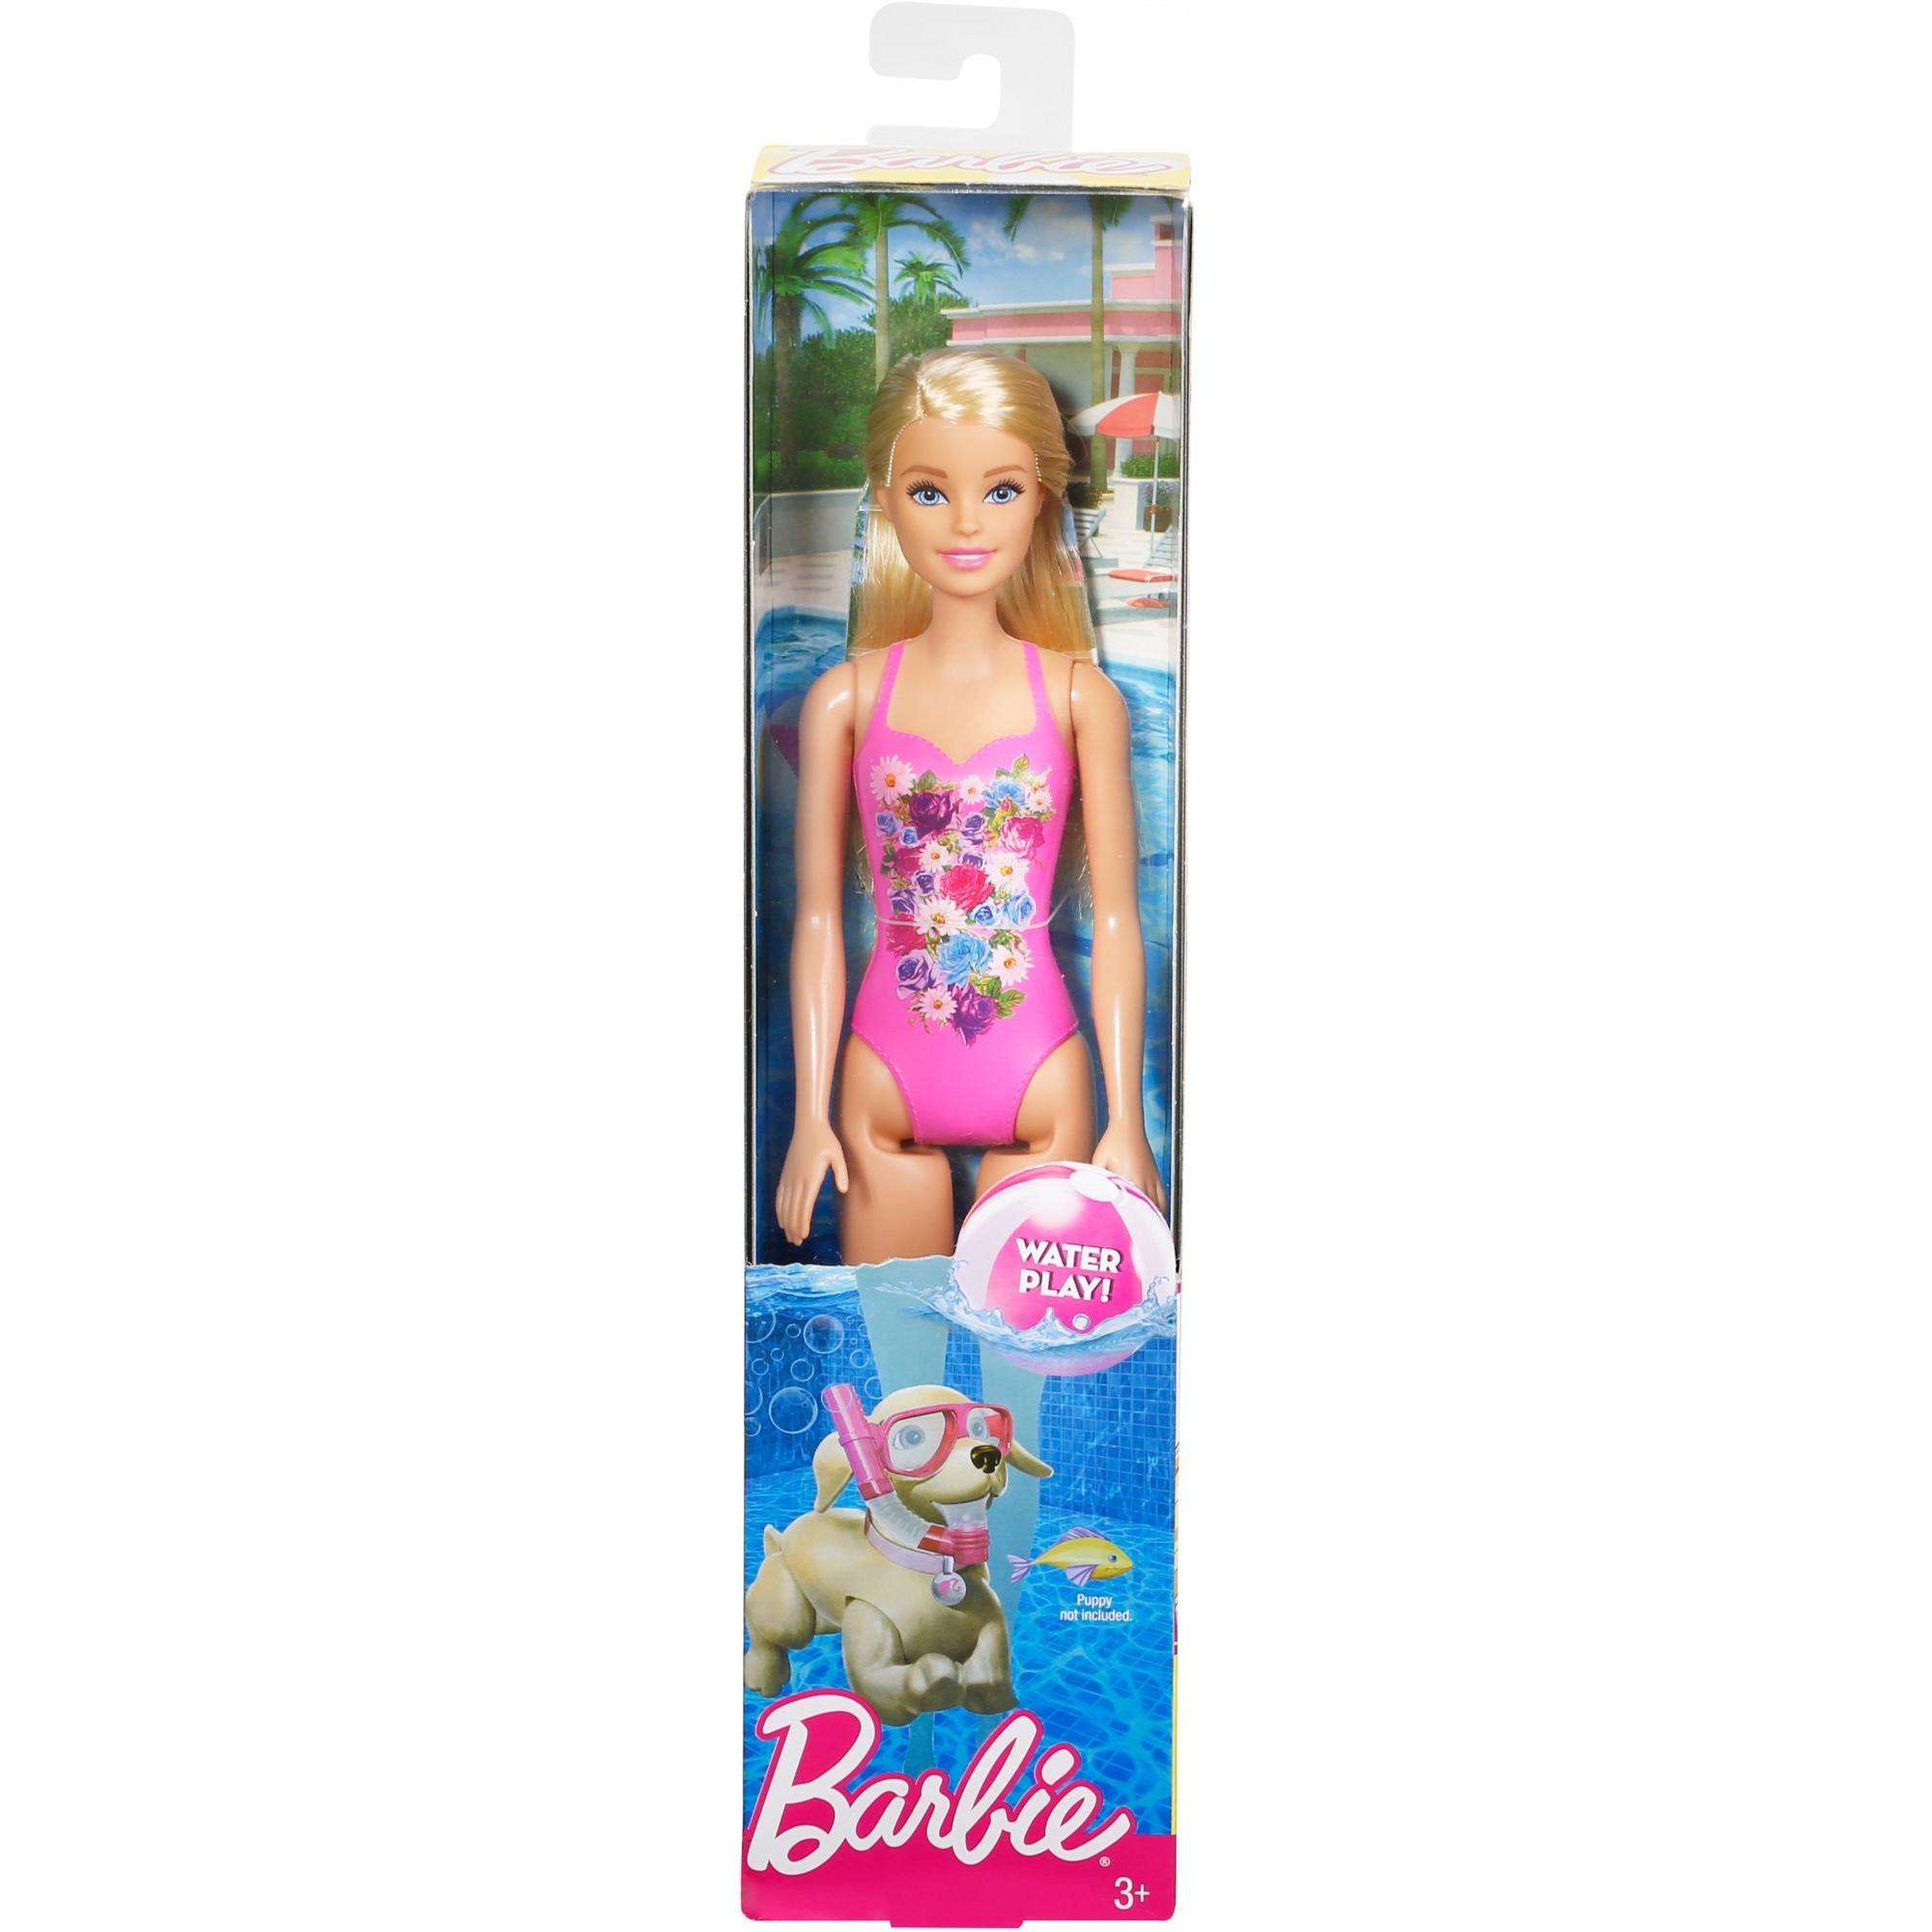 Barbie Beach Doll with Pink Graphic One-Piece Swimsuit - image 4 of 5